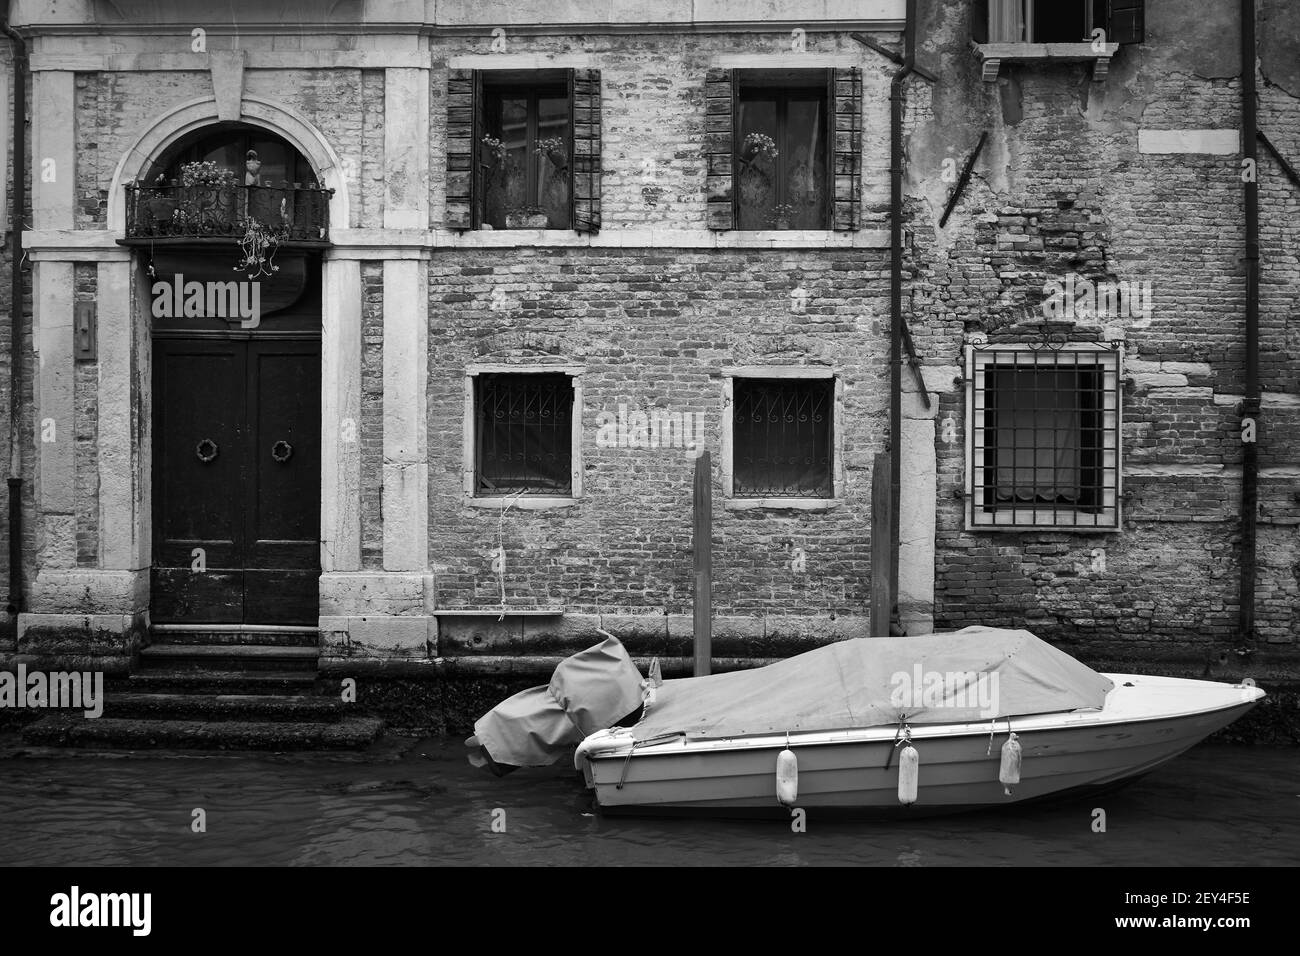 Venetian canal with old house and moored boat, Venice, Italy. Black and white photography, cityscape Stock Photo